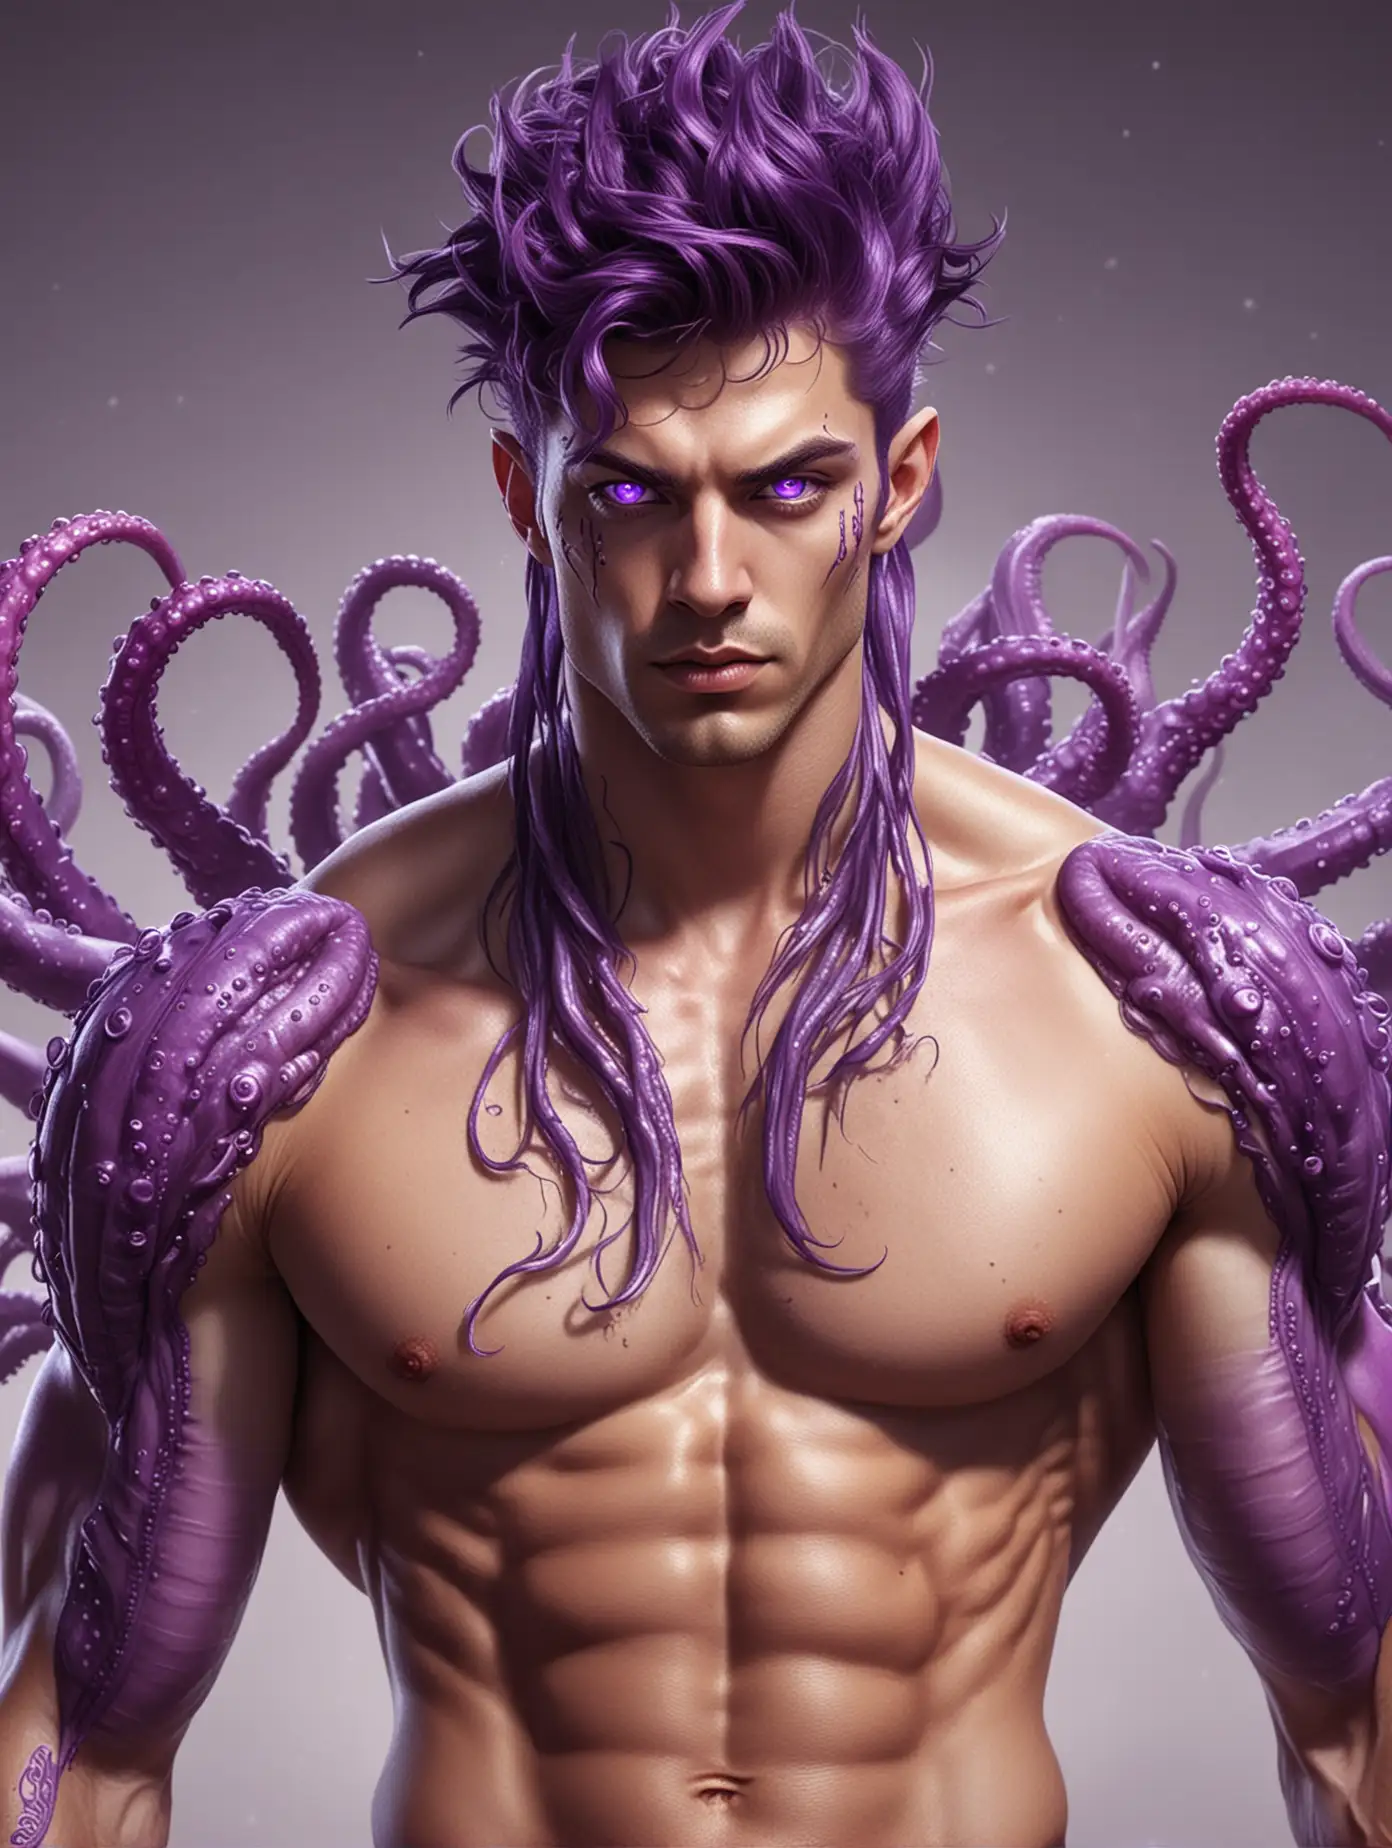 Illustration of a very handsome shirtless alien man with big purple tentacles, purple eyes, purple hair, nice abs